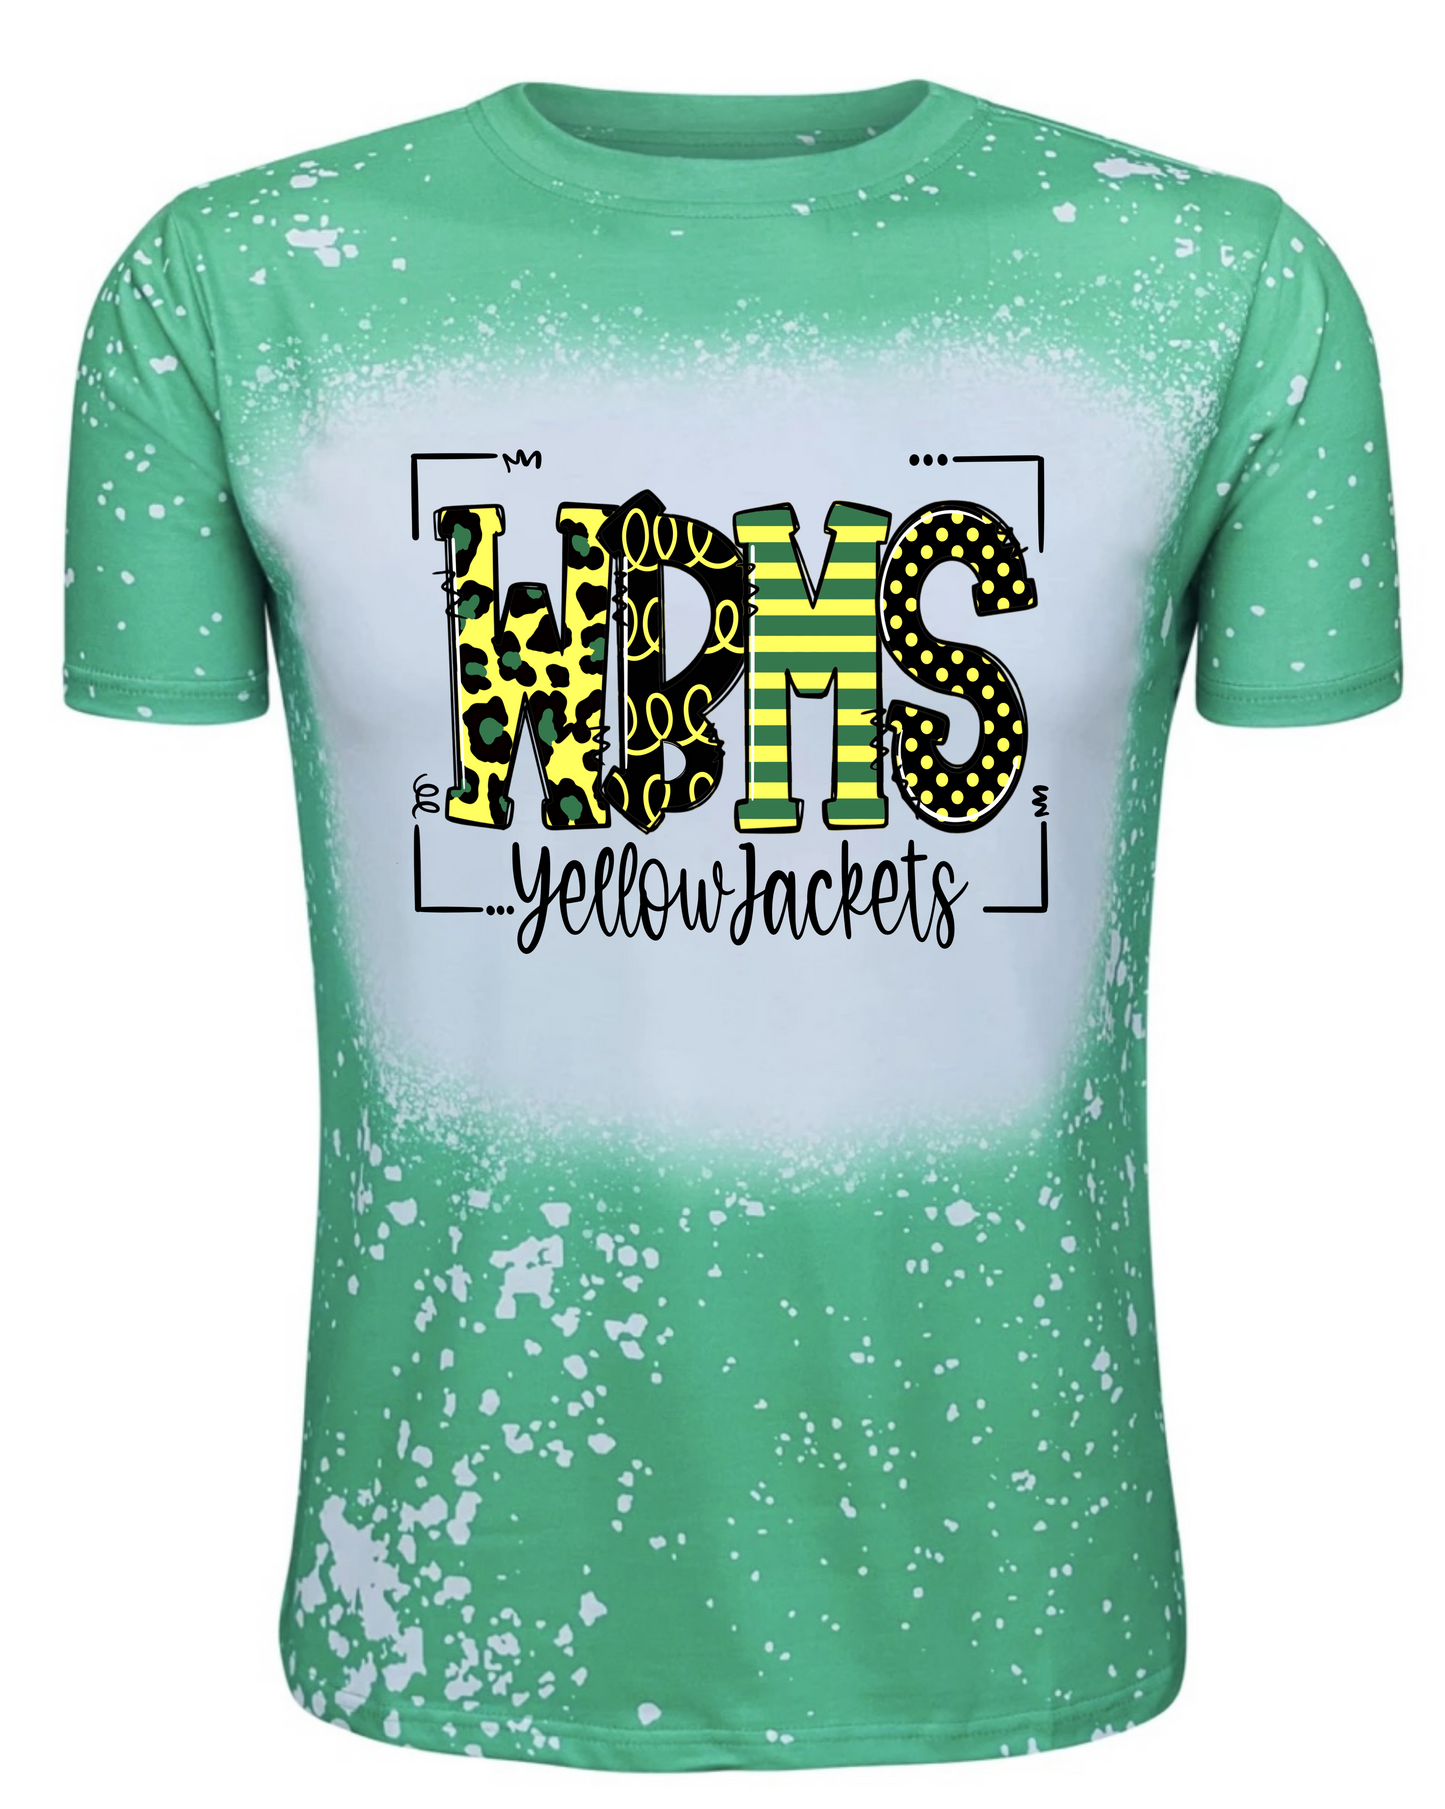 WBMS Bleached Tshirt *Limited Edition*